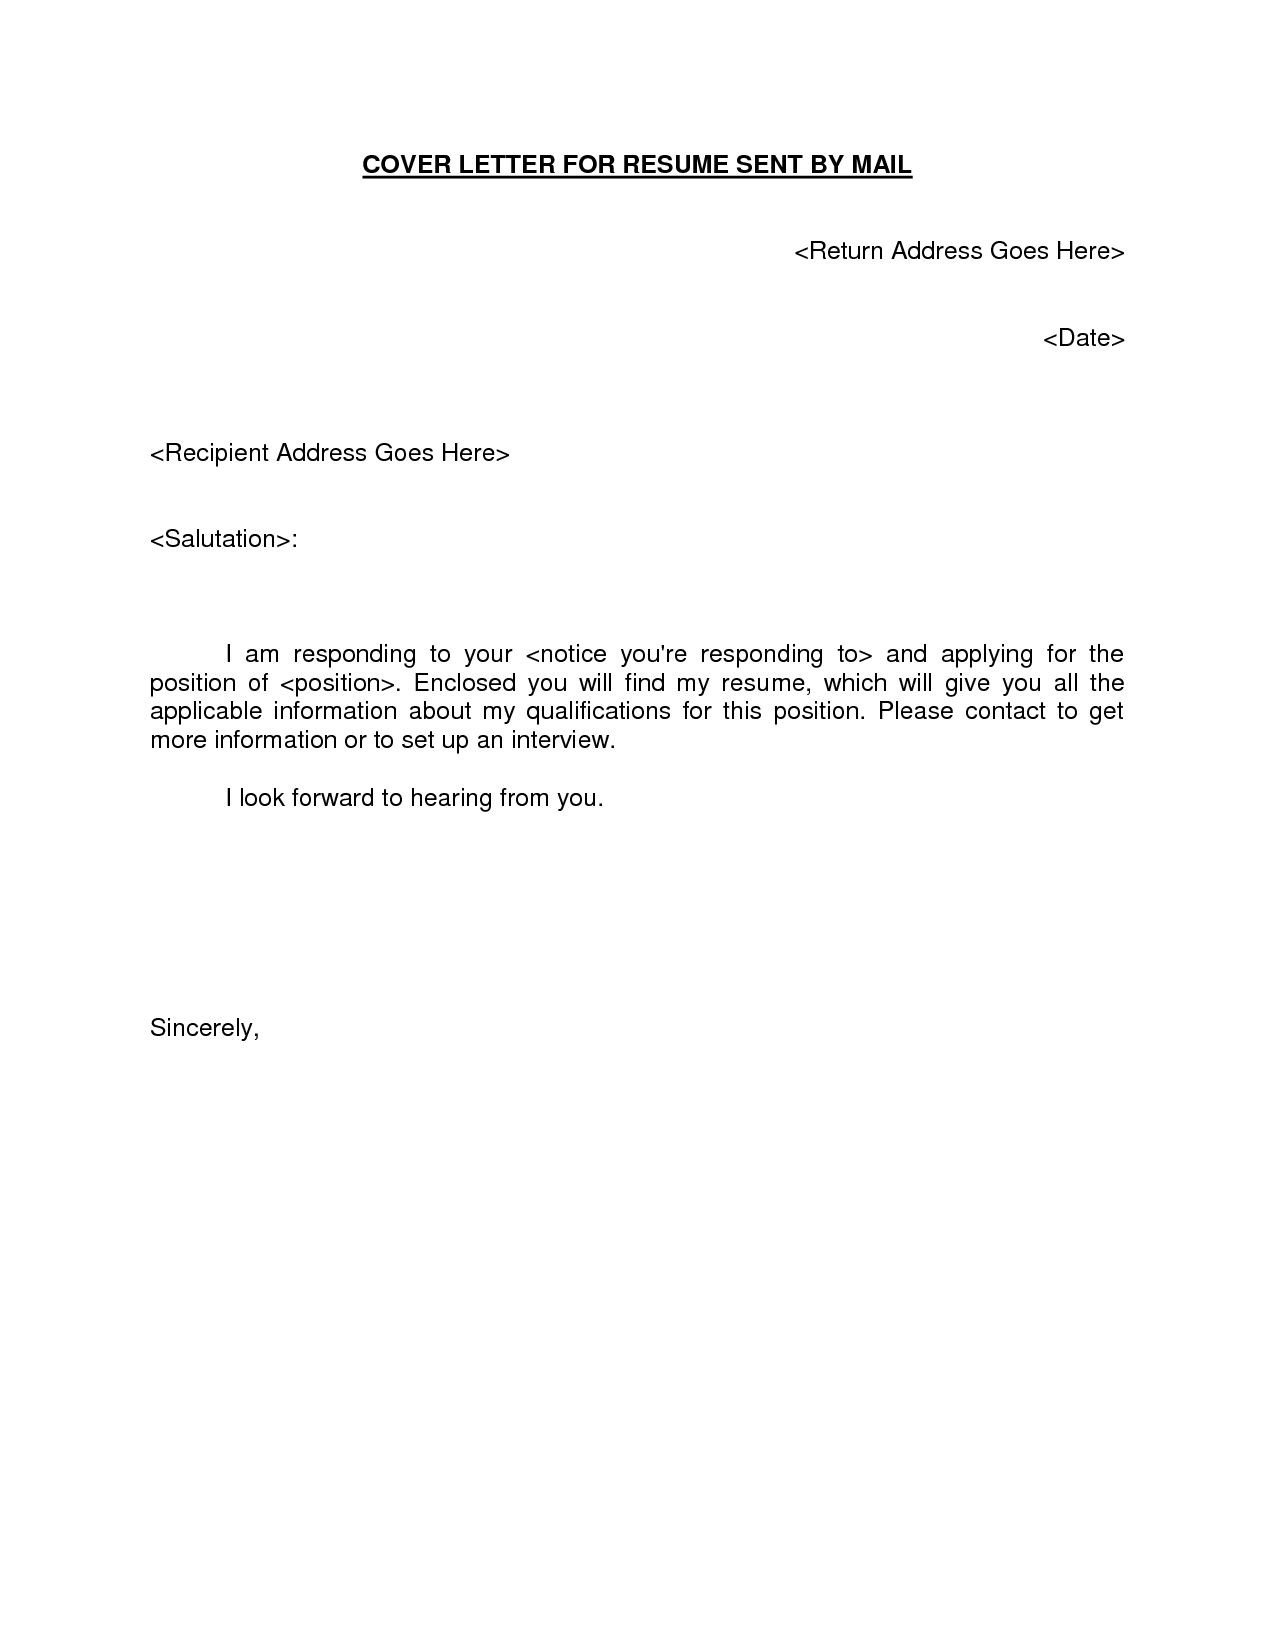 Email with Resume and Cover Letter Sample 25lancarrezekiq Email Cover Letter Cover Letter for Resume, Email Cover …